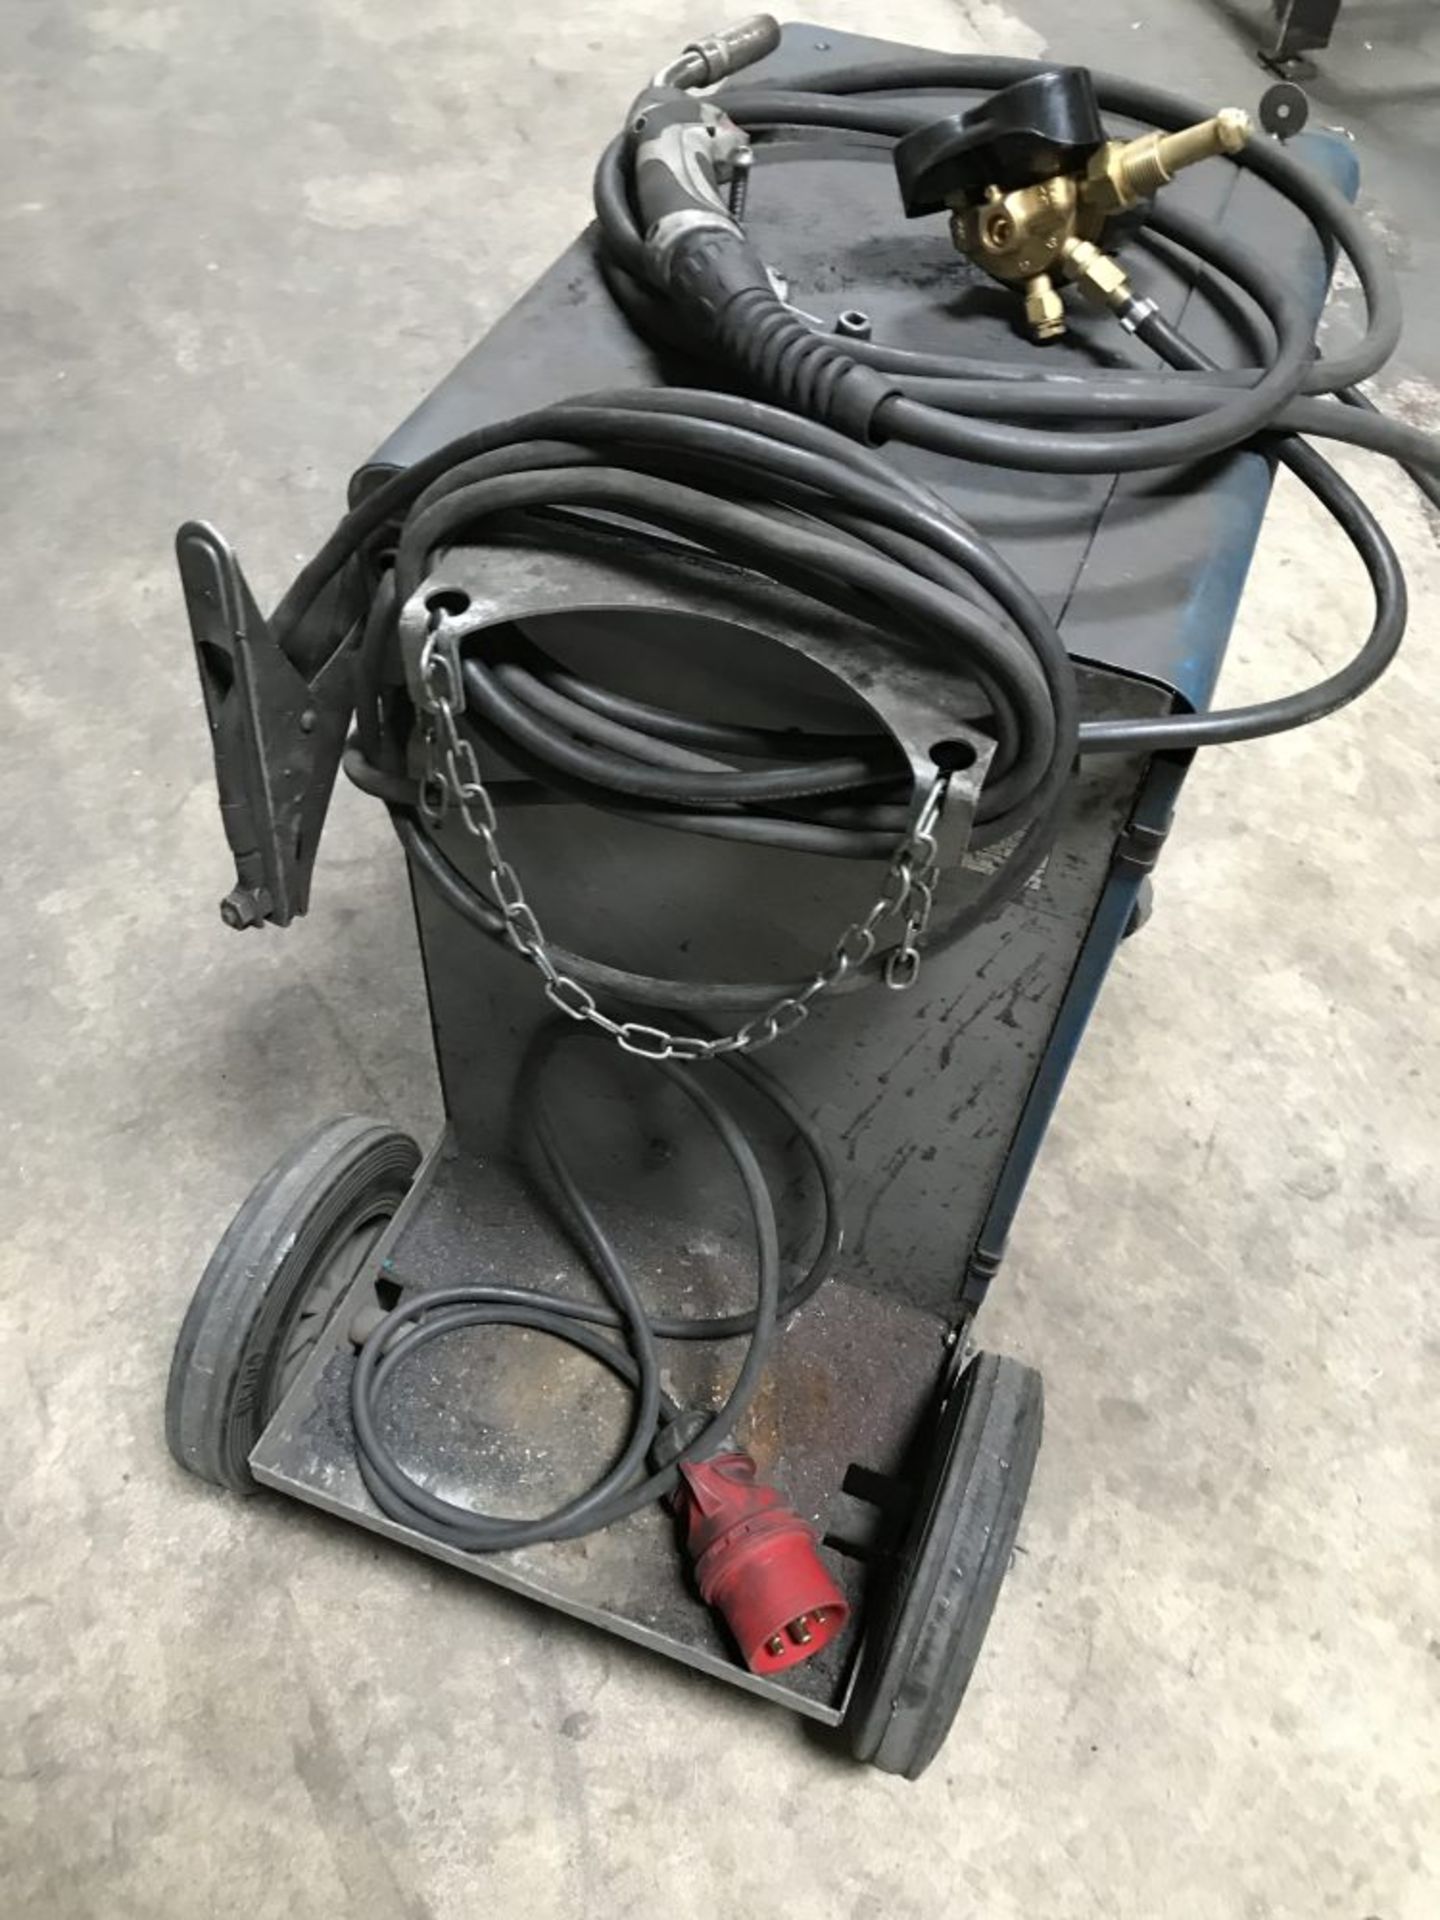 TecArc welding set with regulator, torch, hose and trolley - Image 5 of 6